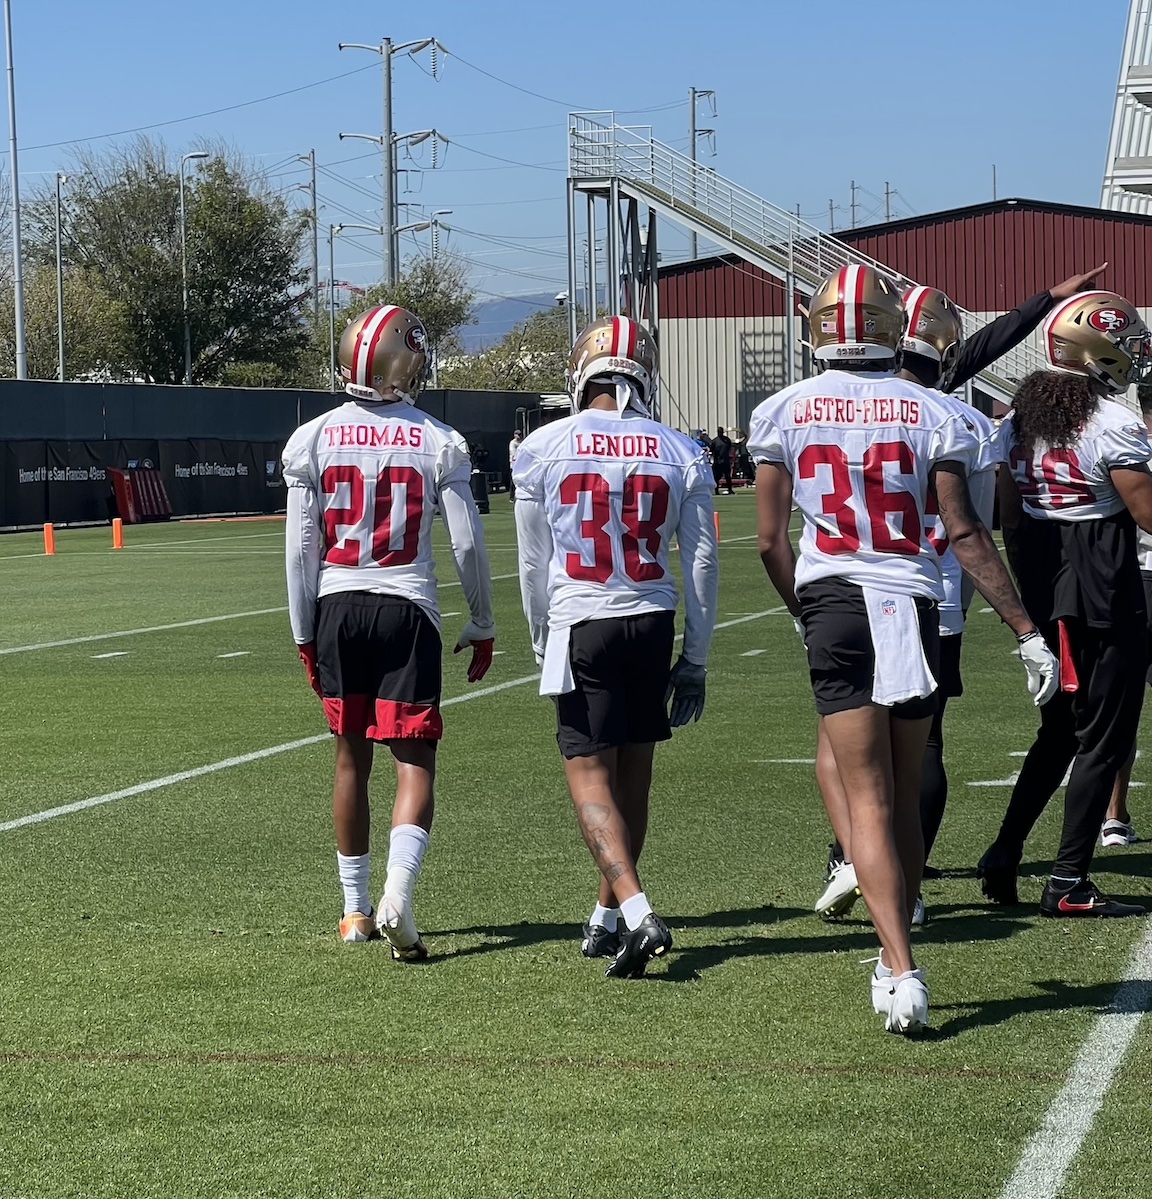 After a Difficult 2021, 49ers CB Deommodore Lenoir Works to Take Next Step